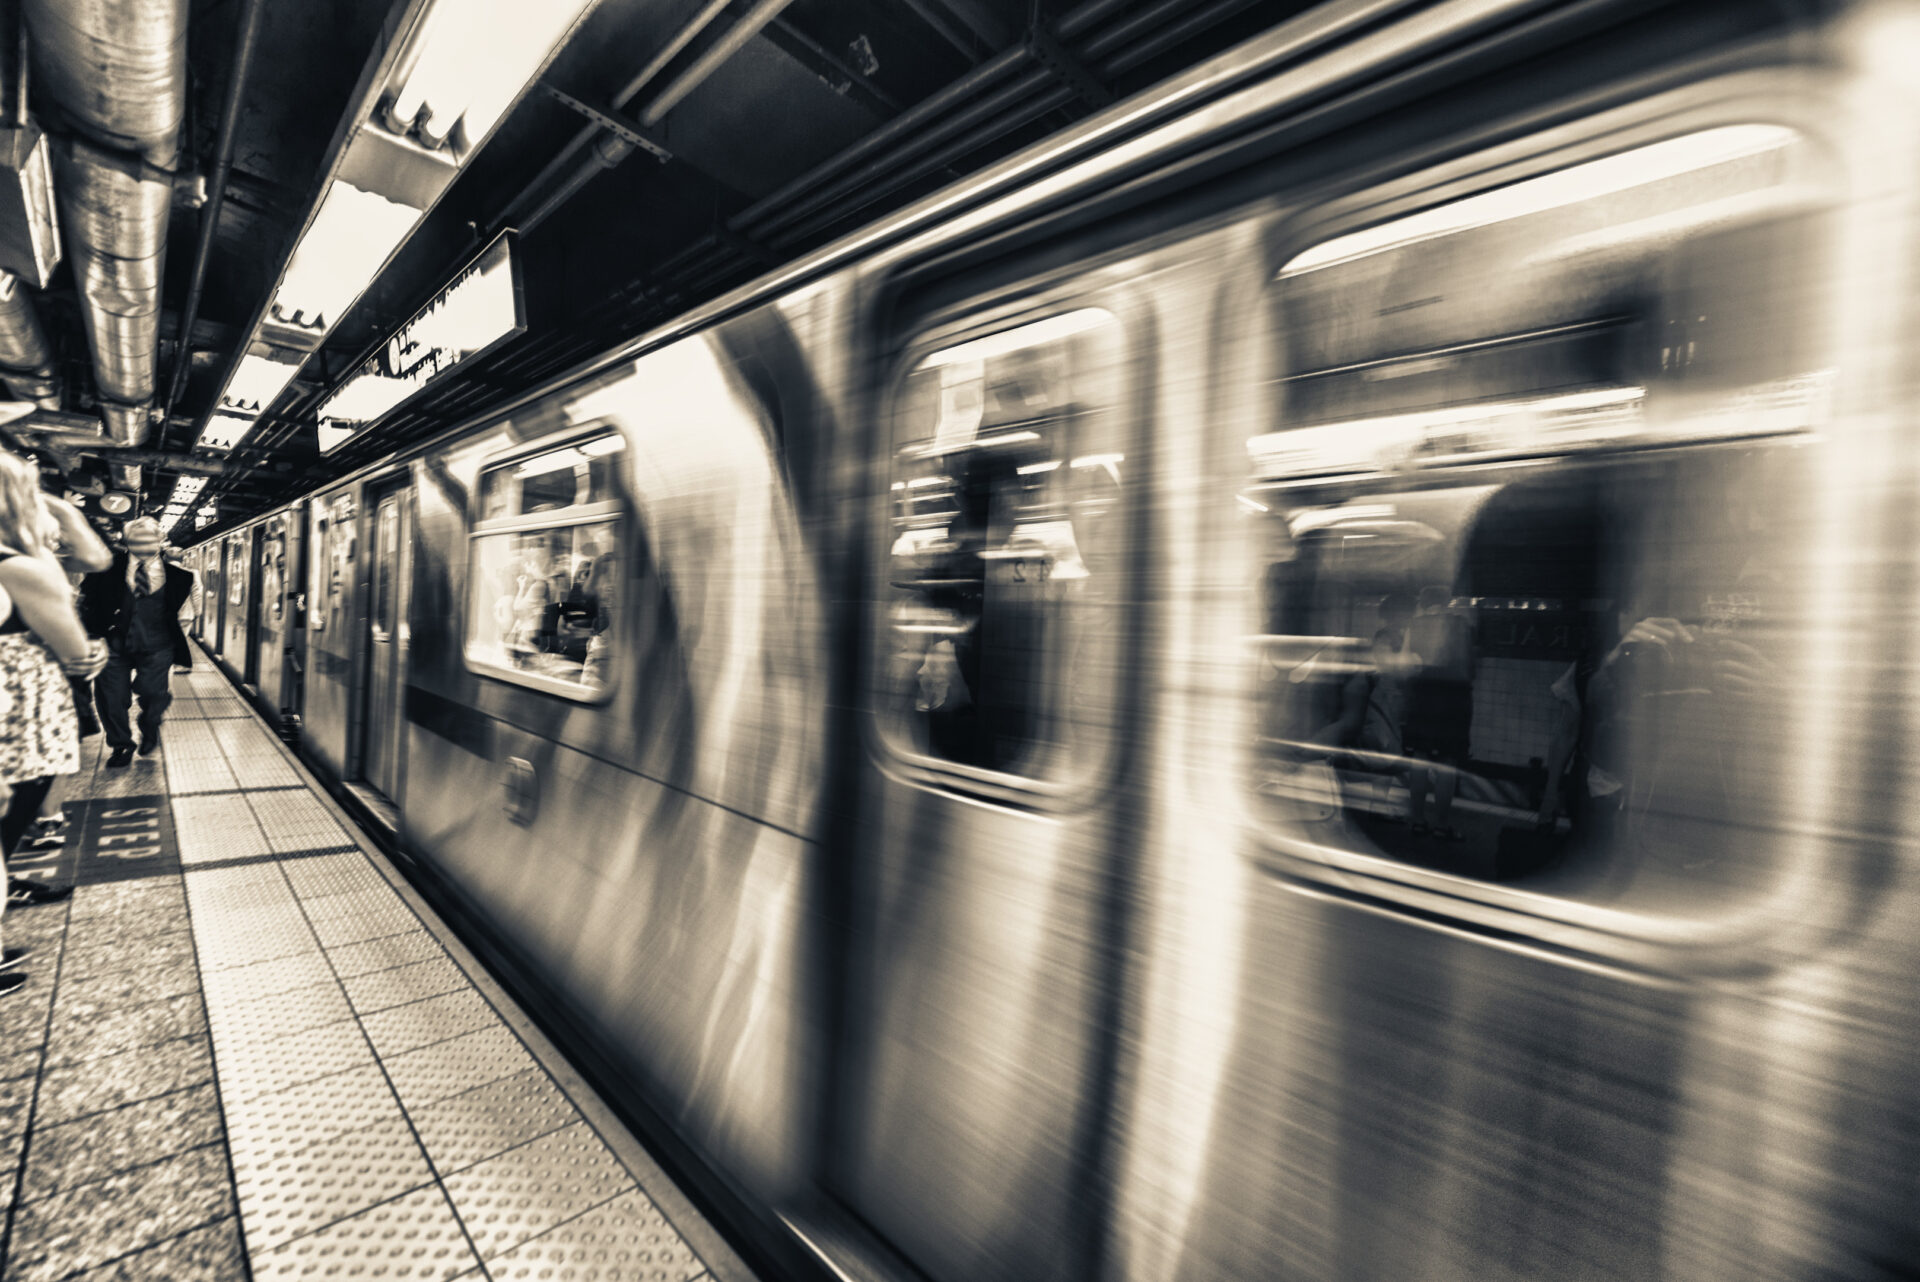 A dynamic scene capturing a subway train rapidly accelerating, showcasing the energy and movement of urban transportation.